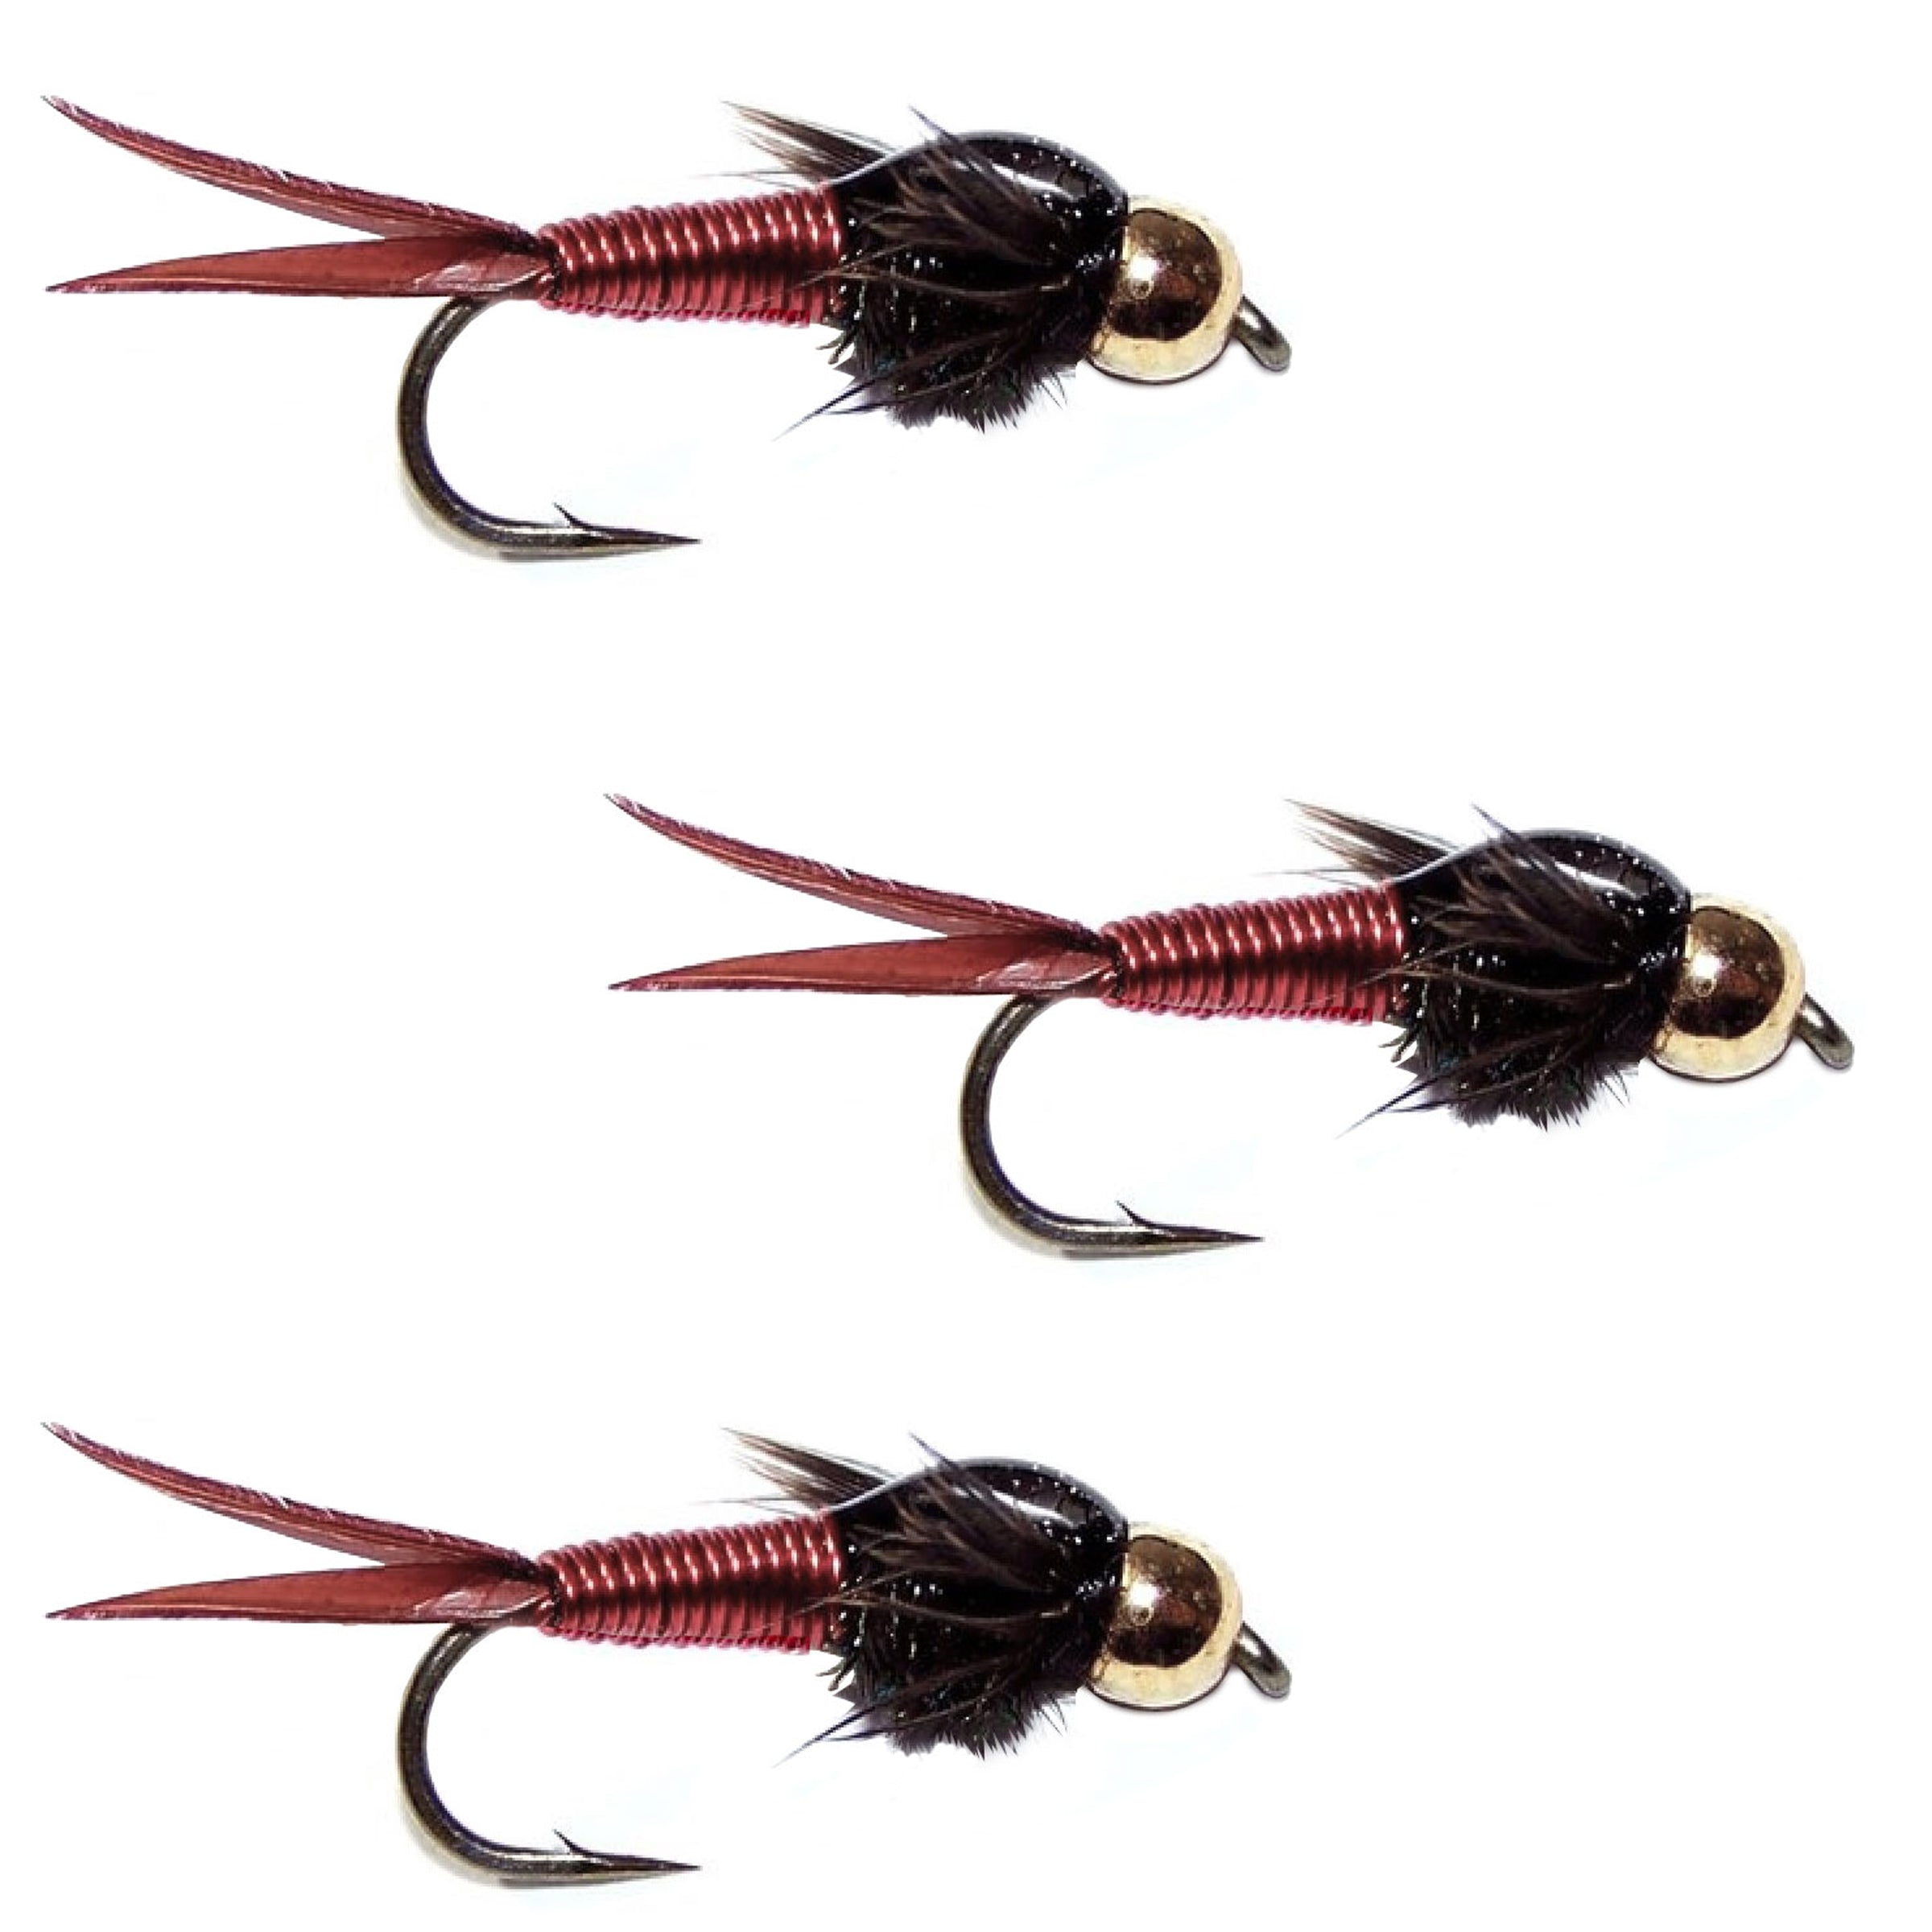 3 Pack Bead Head Red Copper John Nymph Fly Fishing Flies -  Hook Size 12